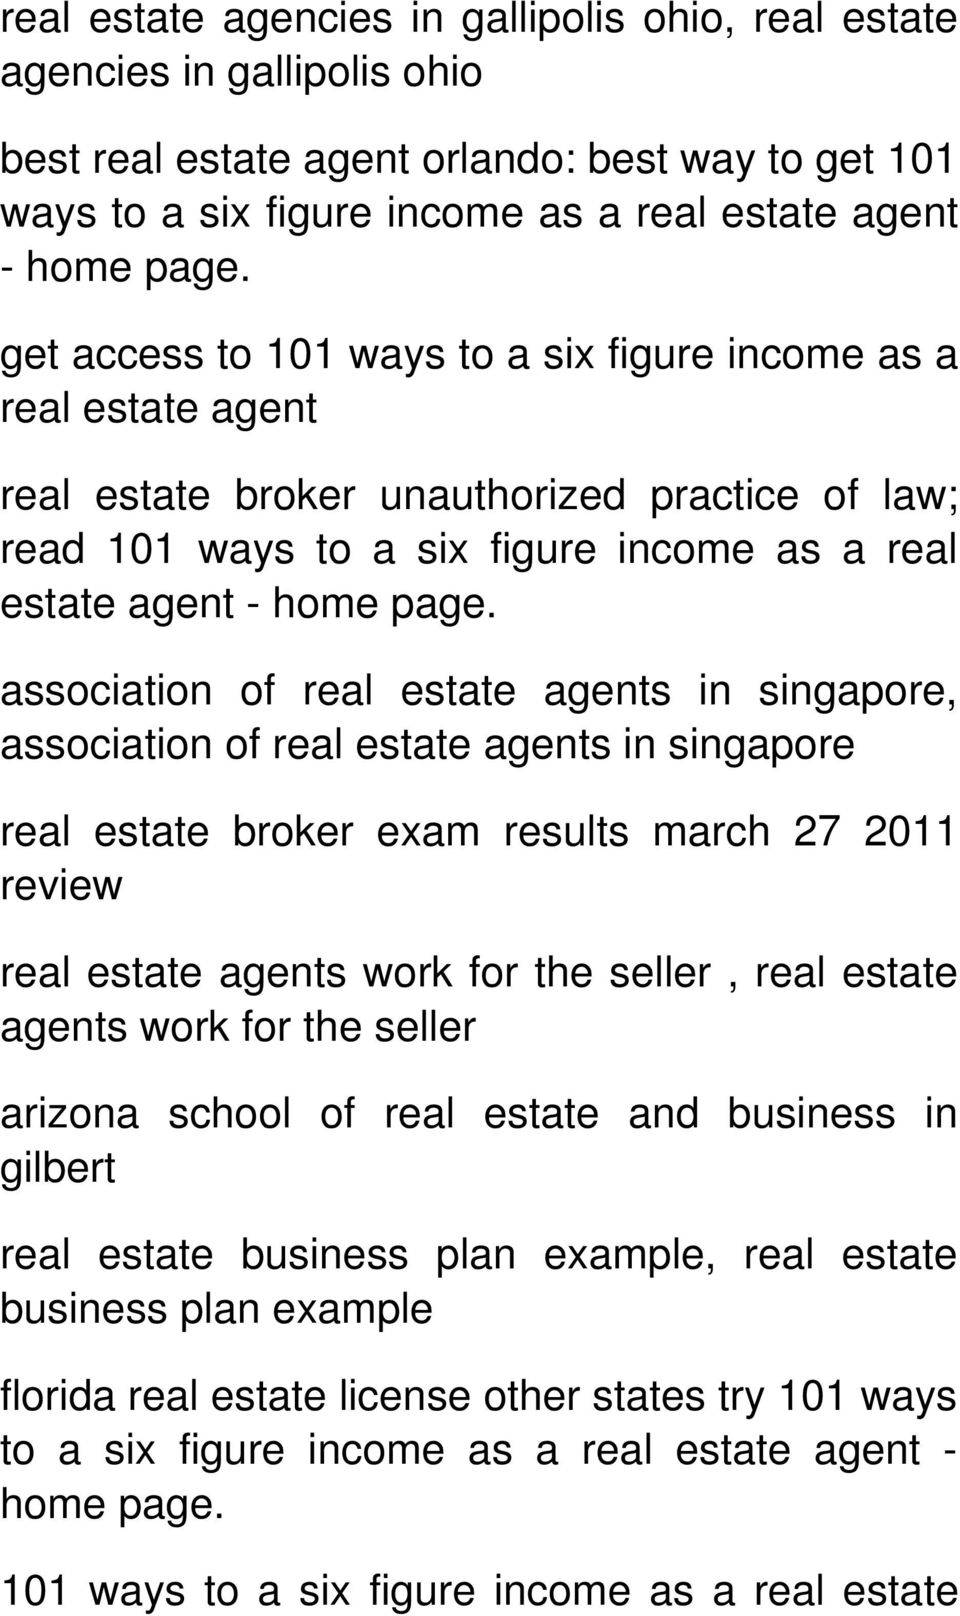 association of real estate agents in singapore, association of real estate agents in singapore real estate broker exam results march 27 2011 review real estate agents work for the seller, real estate